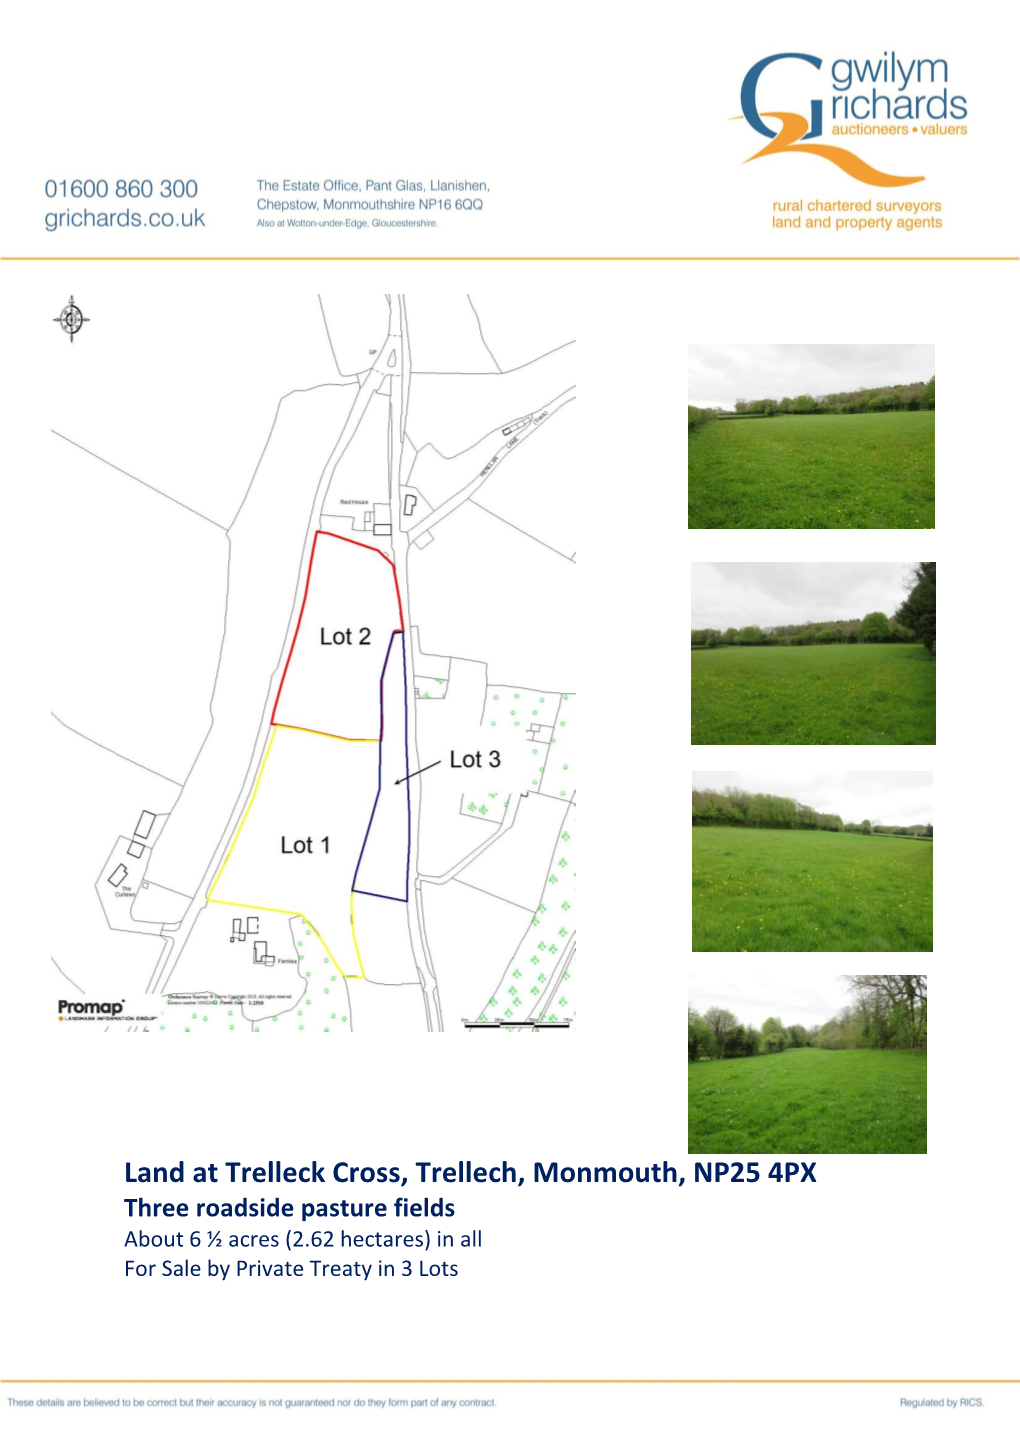 Land at Trelleck Cross, Trellech, Monmouth, NP25 4PX Three Roadside Pasture Fields About 6 ½ Acres (2.62 Hectares) in All for Sale by Private Treaty in 3 Lots